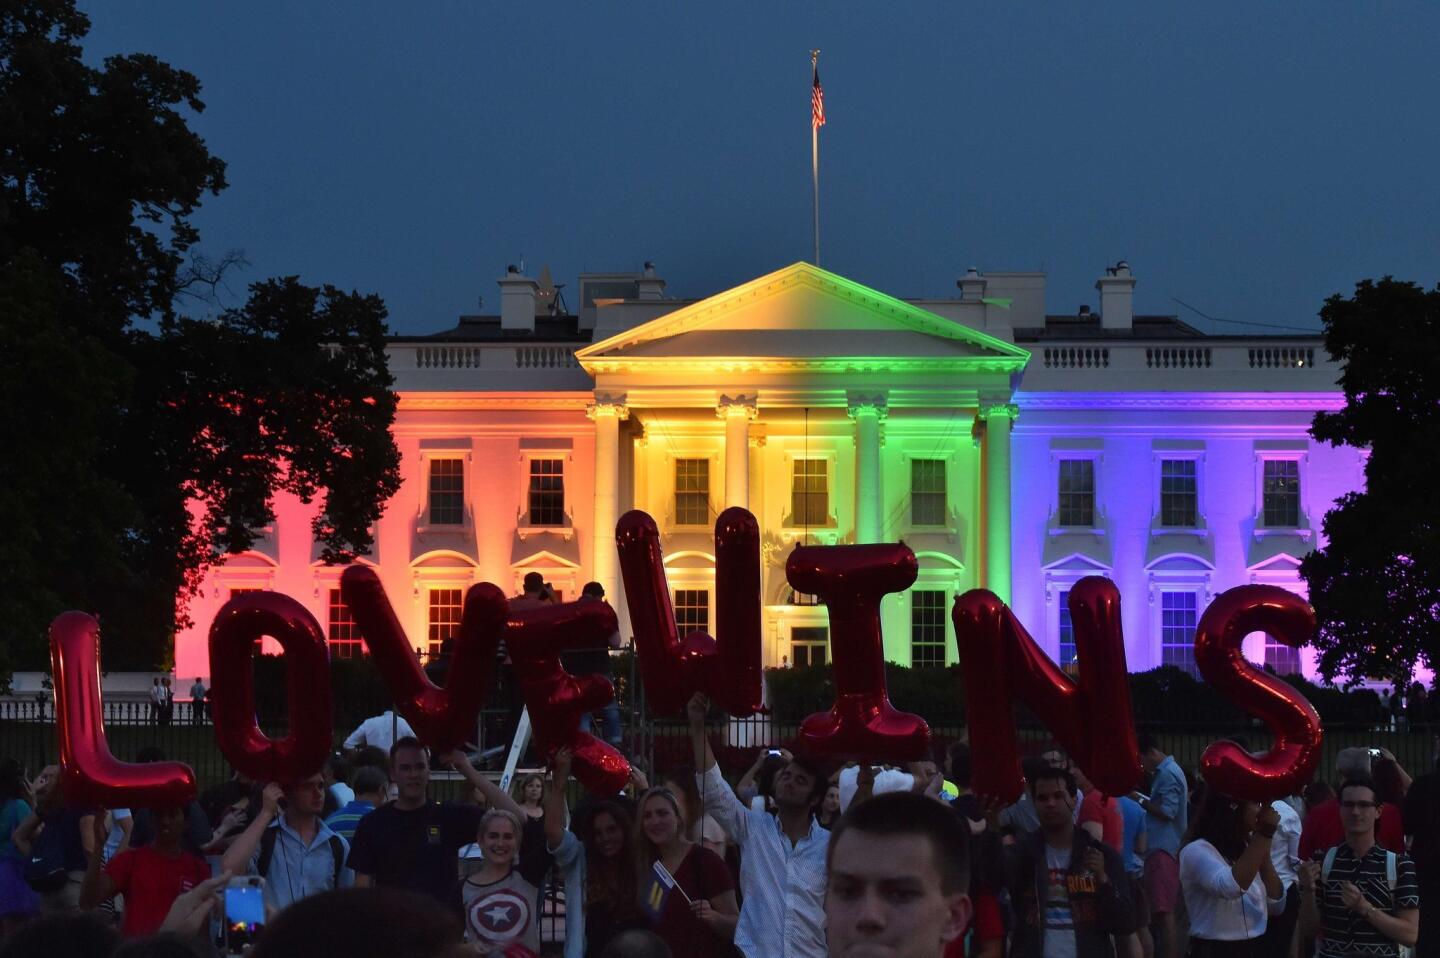 People hold balloon letters reading, "Love wins," on June 26, 2015, in front of the White House illuminated by rainbow colors in Washington.